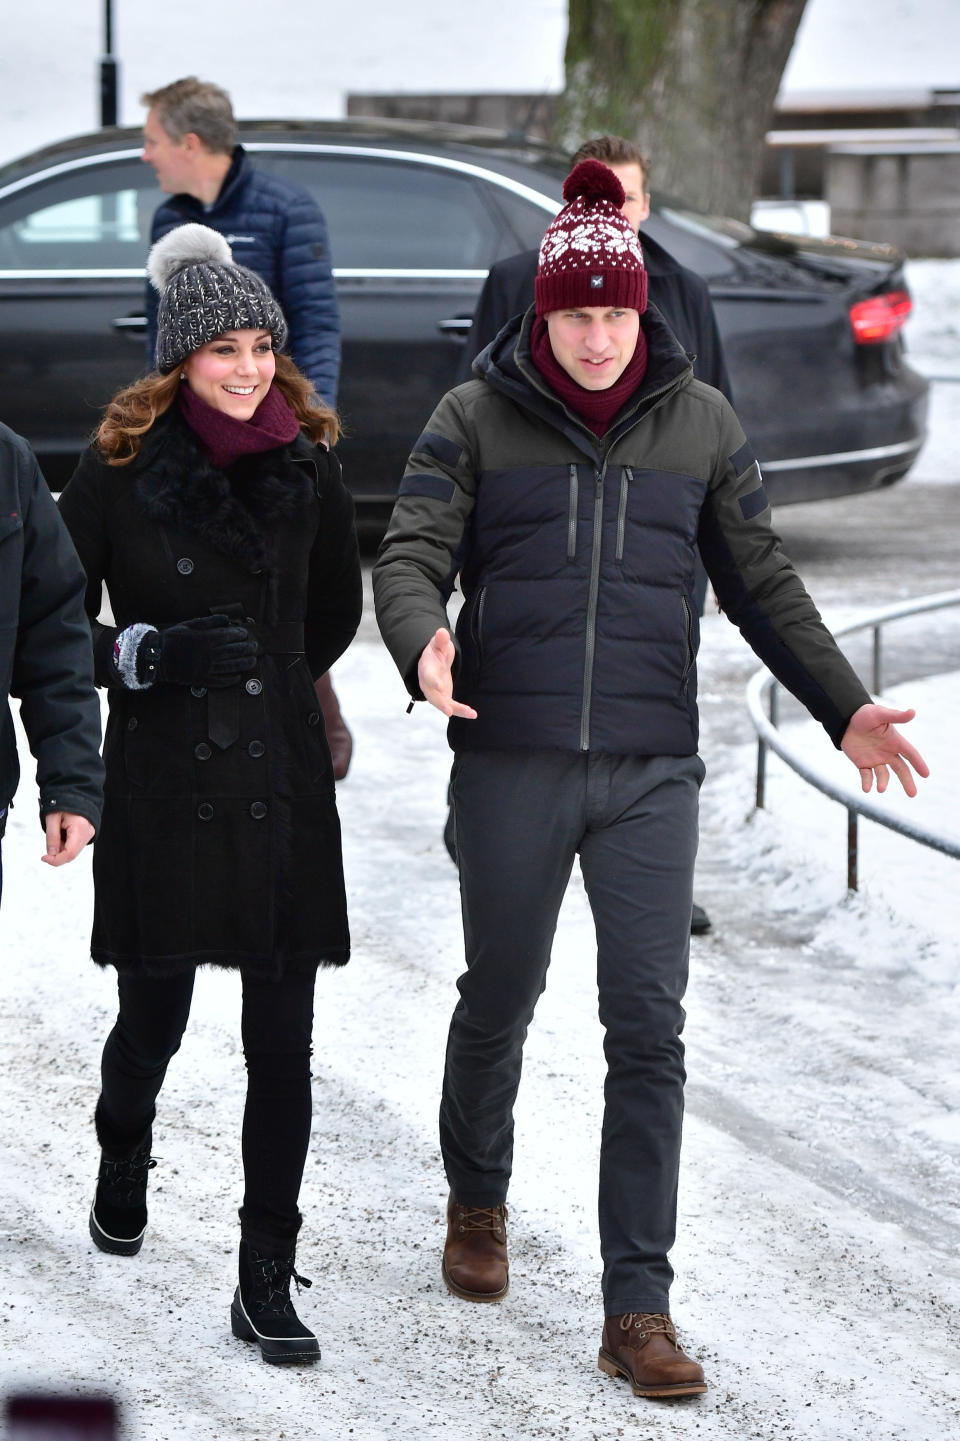 The Duke and Duchess of Cambridge have kicked off their royal tour of Sweden and Norway. (Photo: PA)